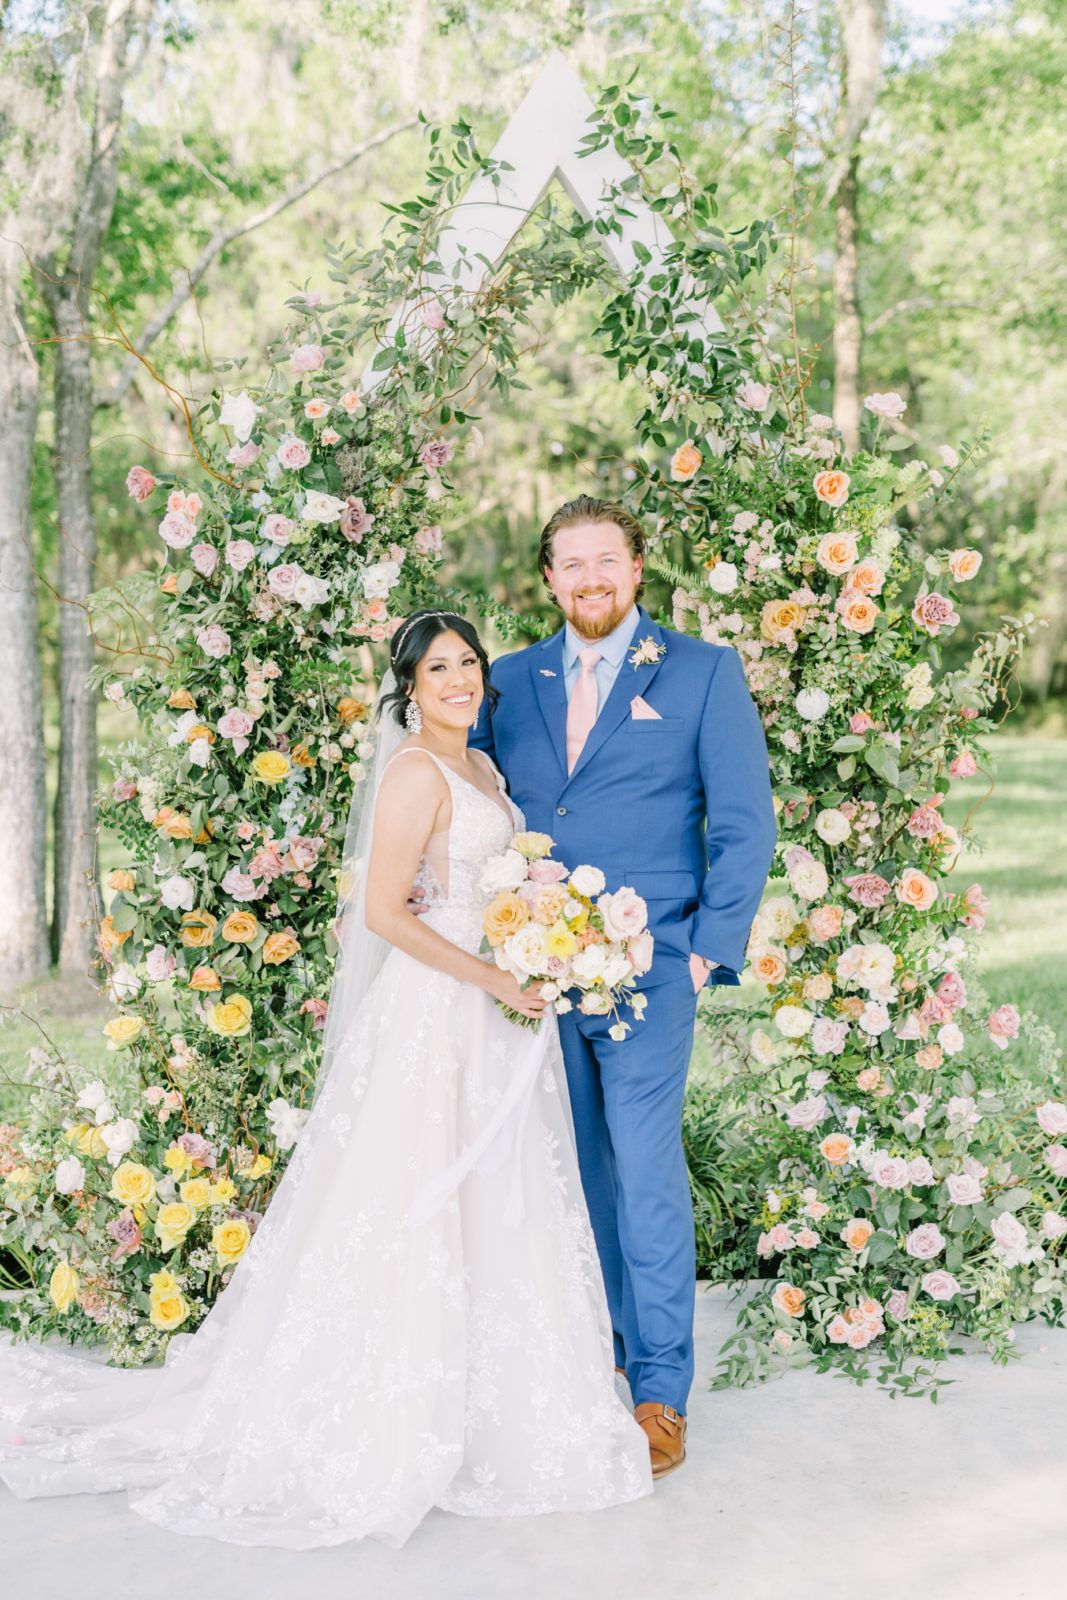 Christina Elliott Photography captures a portrait of the bride and groom standing in front of a floral altar. rose altar romantic #ChristinaElliottPhotography #ChristinaElliottWeddings #Houstonwedding #TheSpringsVenue #EastHoustonweddings #sayIdo